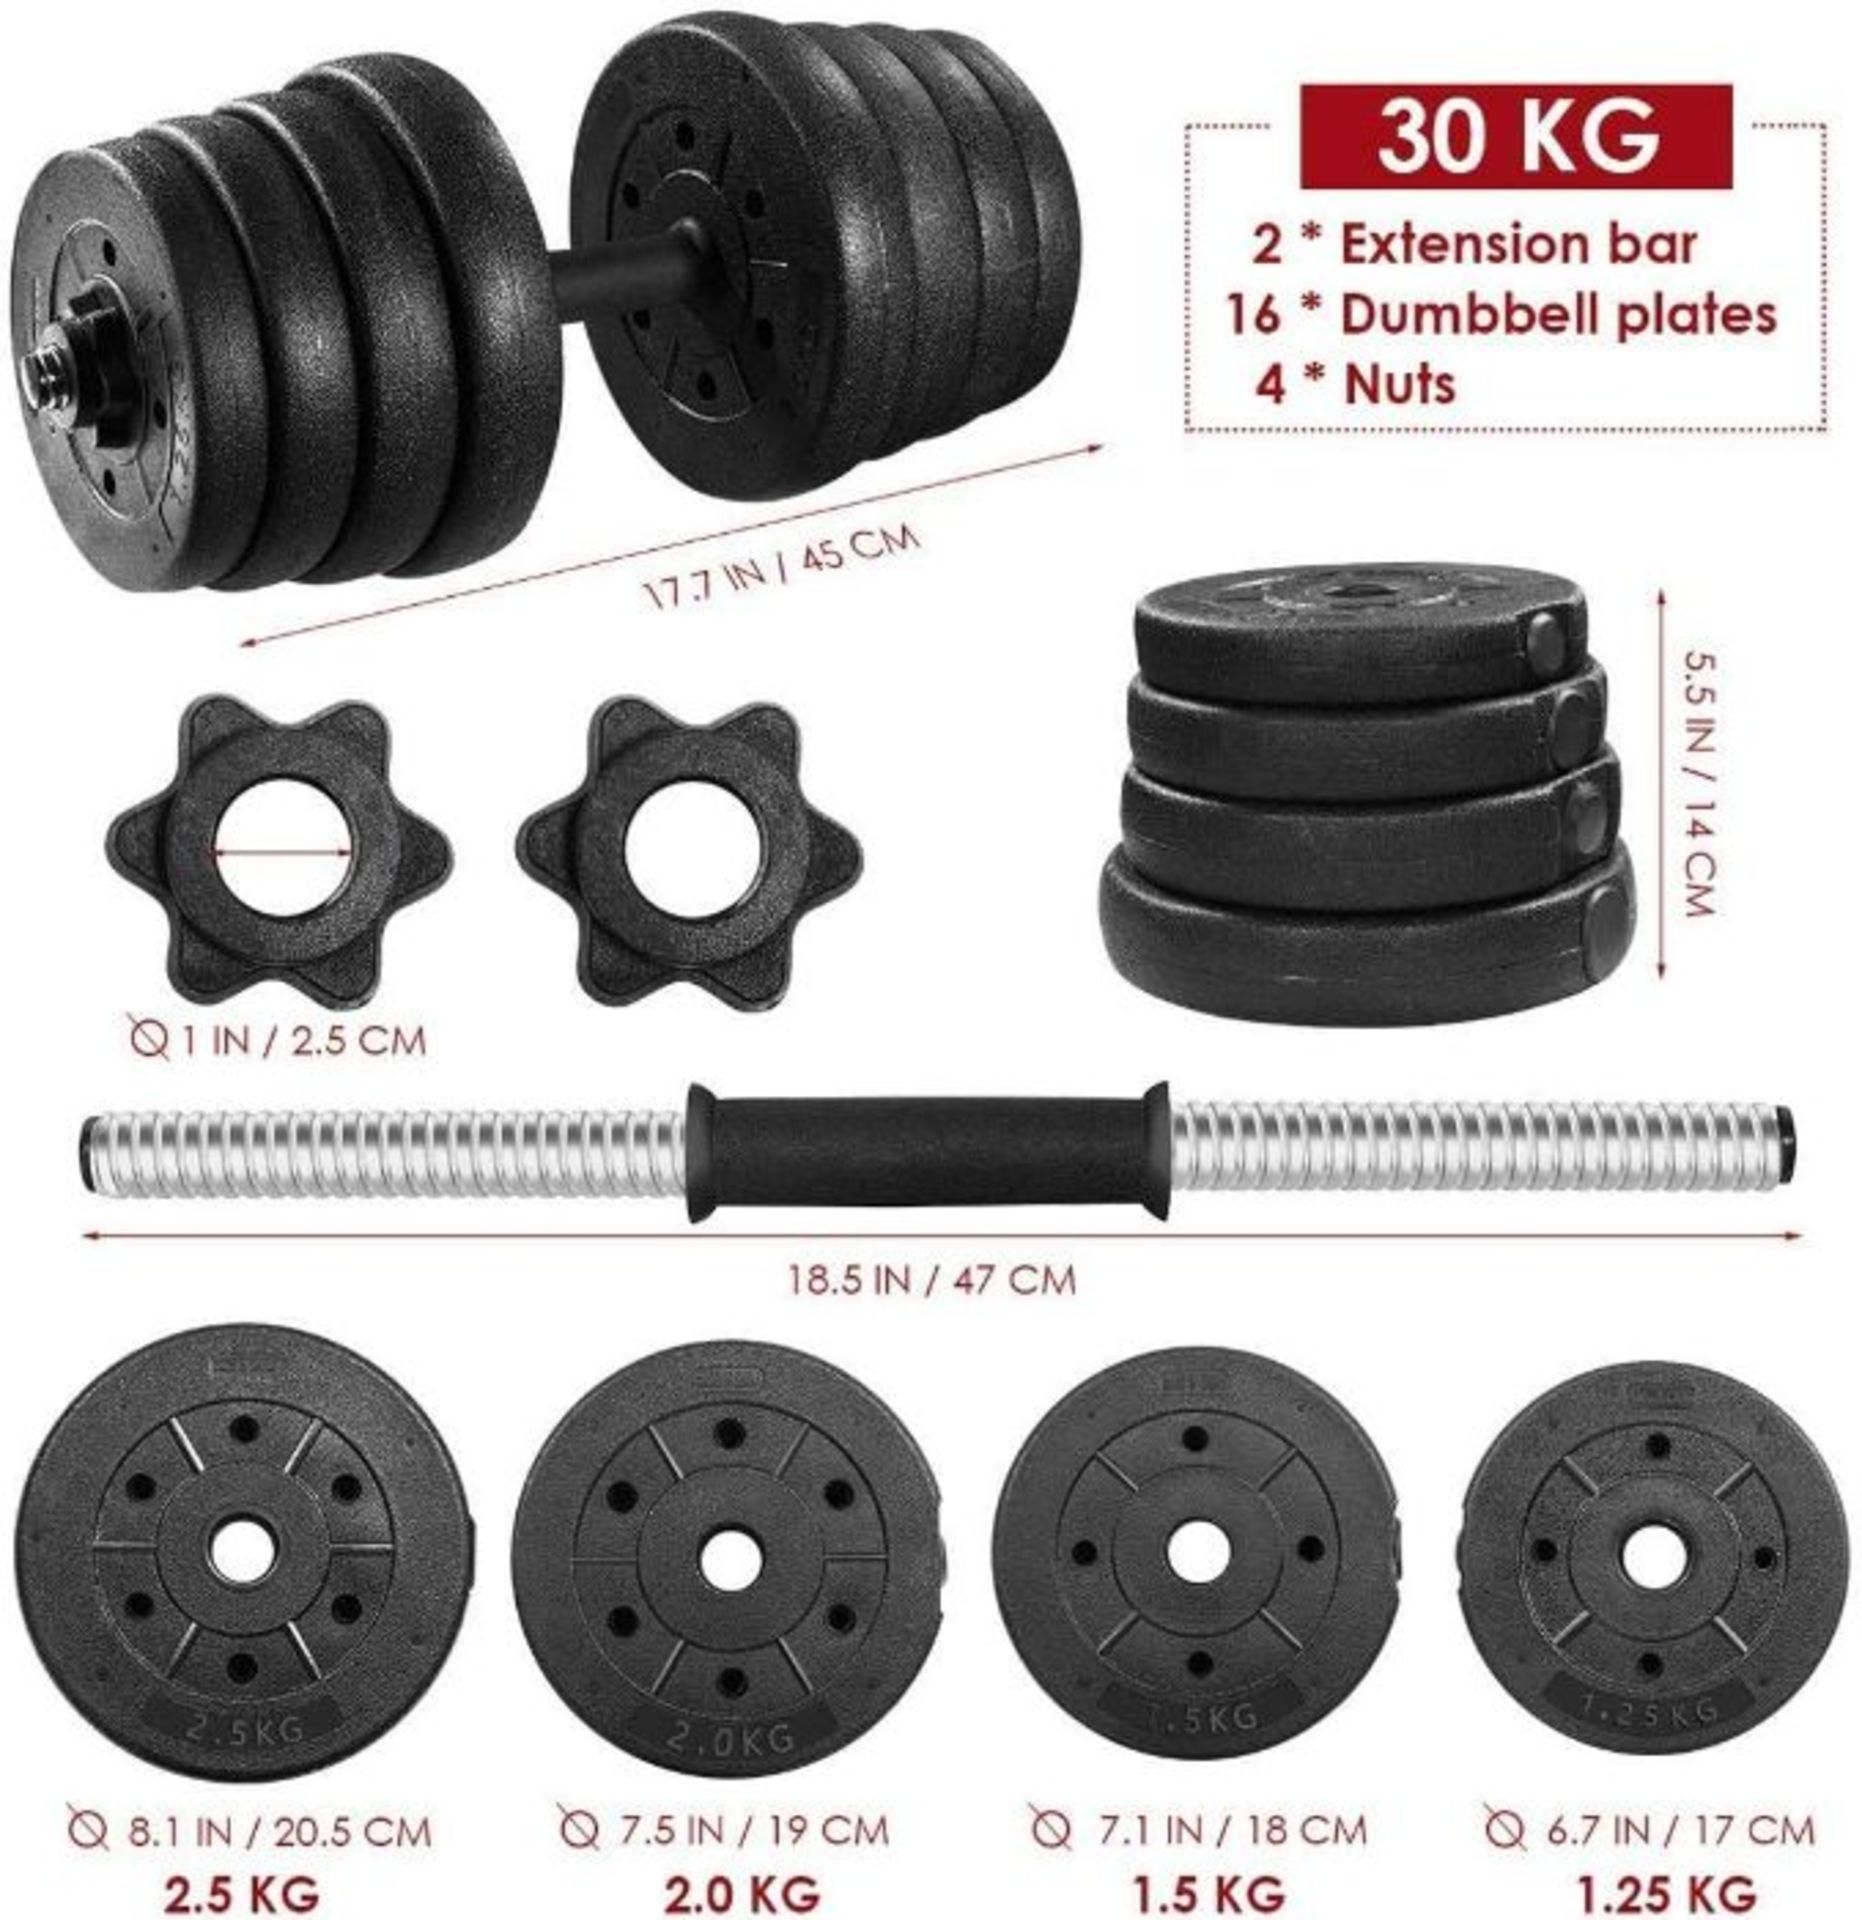 10x Movtotop 30KG adjustable Dumb Bell weight set, new and boxed, we can only find these in - Image 7 of 8